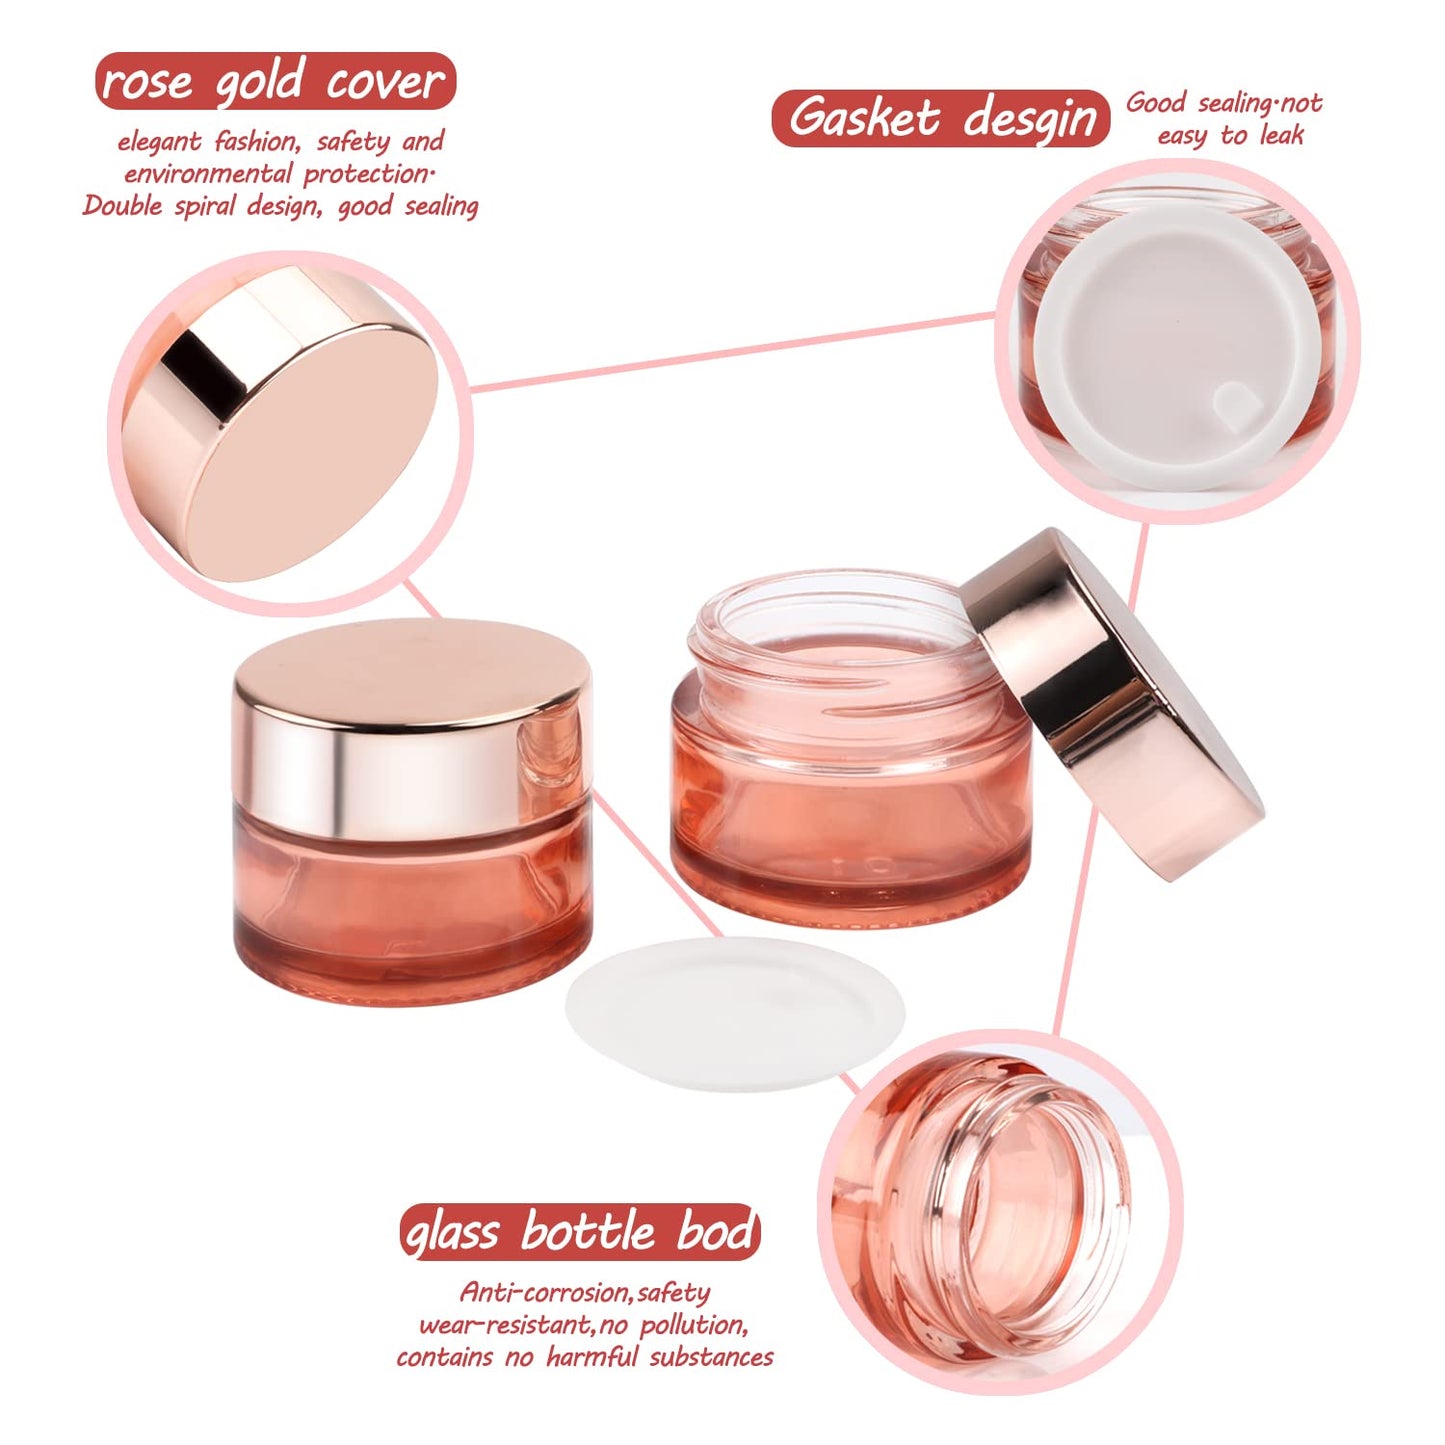 DMuuuDM 12 Pcs 0.5 oz Pink Glass Jars,Empty Refillable Cream Jars with Rose Gold Lids&Inner liner,Sample Cosmetic Container Vials Pot for Face Cream,Ointment,Lotion,Moisturizer